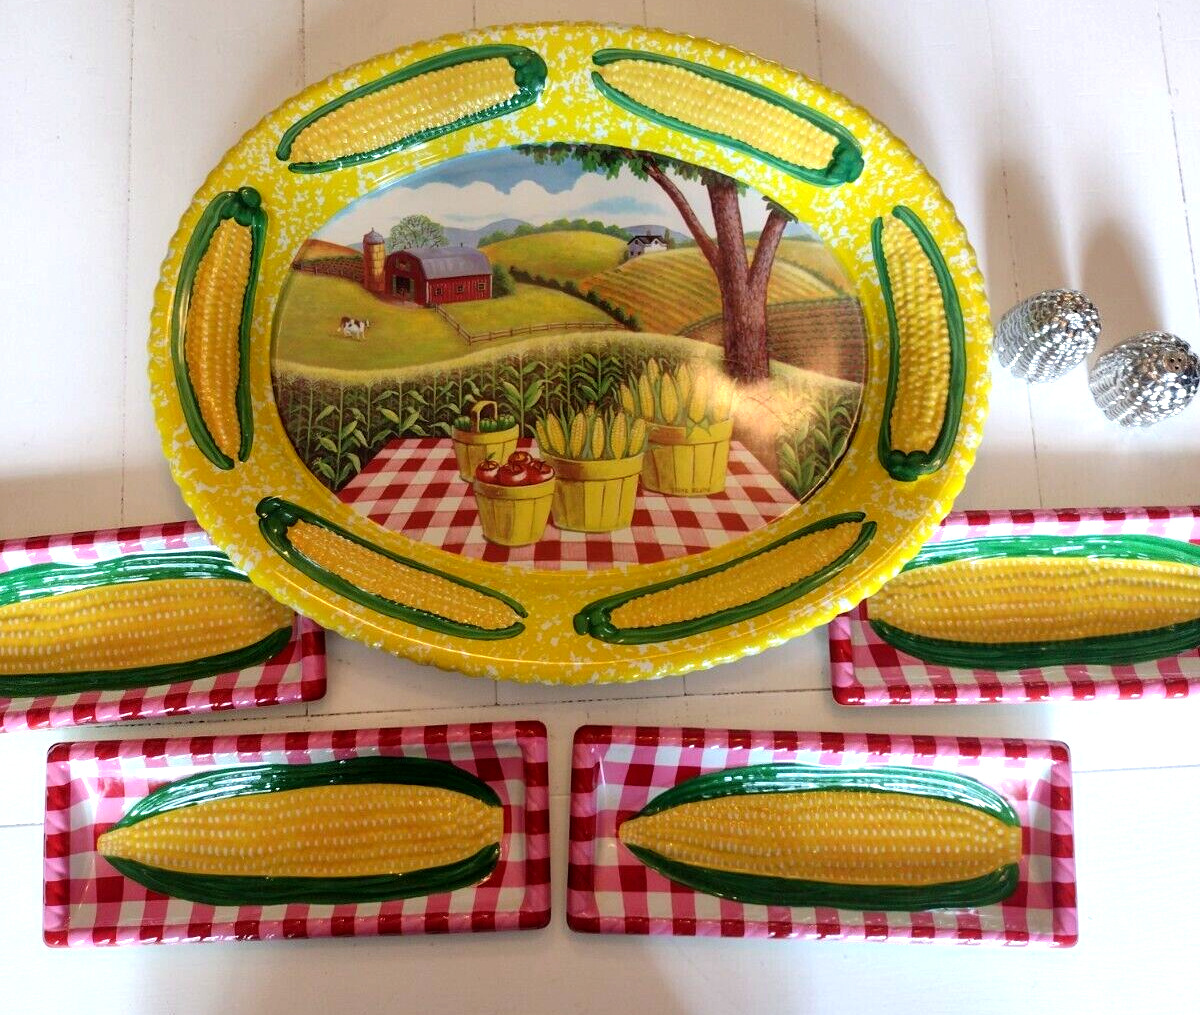 Corn on the Cob Serving Set Platter Trays Salt and Pepper Shakers